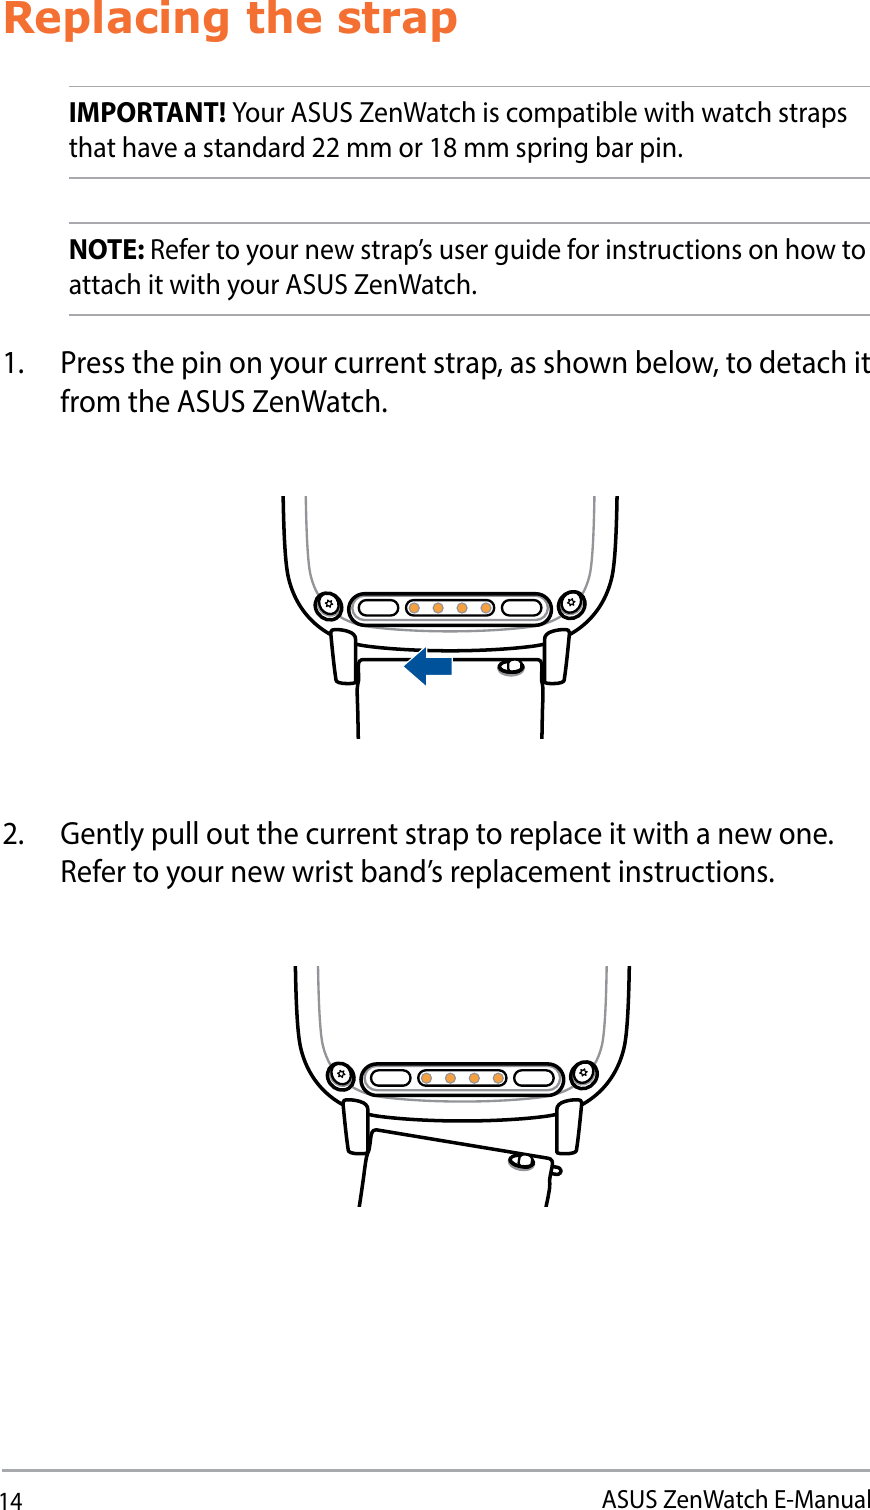 14ASUS ZenWatch E-ManualReplacing the strapIMPORTANT! Your ASUS ZenWatch is compatible with watch straps that have a standard 22 mm or 18 mm spring bar pin.NOTE: Refer to your new strap’s user guide for instructions on how to attach it with your ASUS ZenWatch.1.  Press the pin on your current strap, as shown below, to detach it from the ASUS ZenWatch.2.  Gently pull out the current strap to replace it with a new one. Refer to your new wrist band’s replacement instructions.